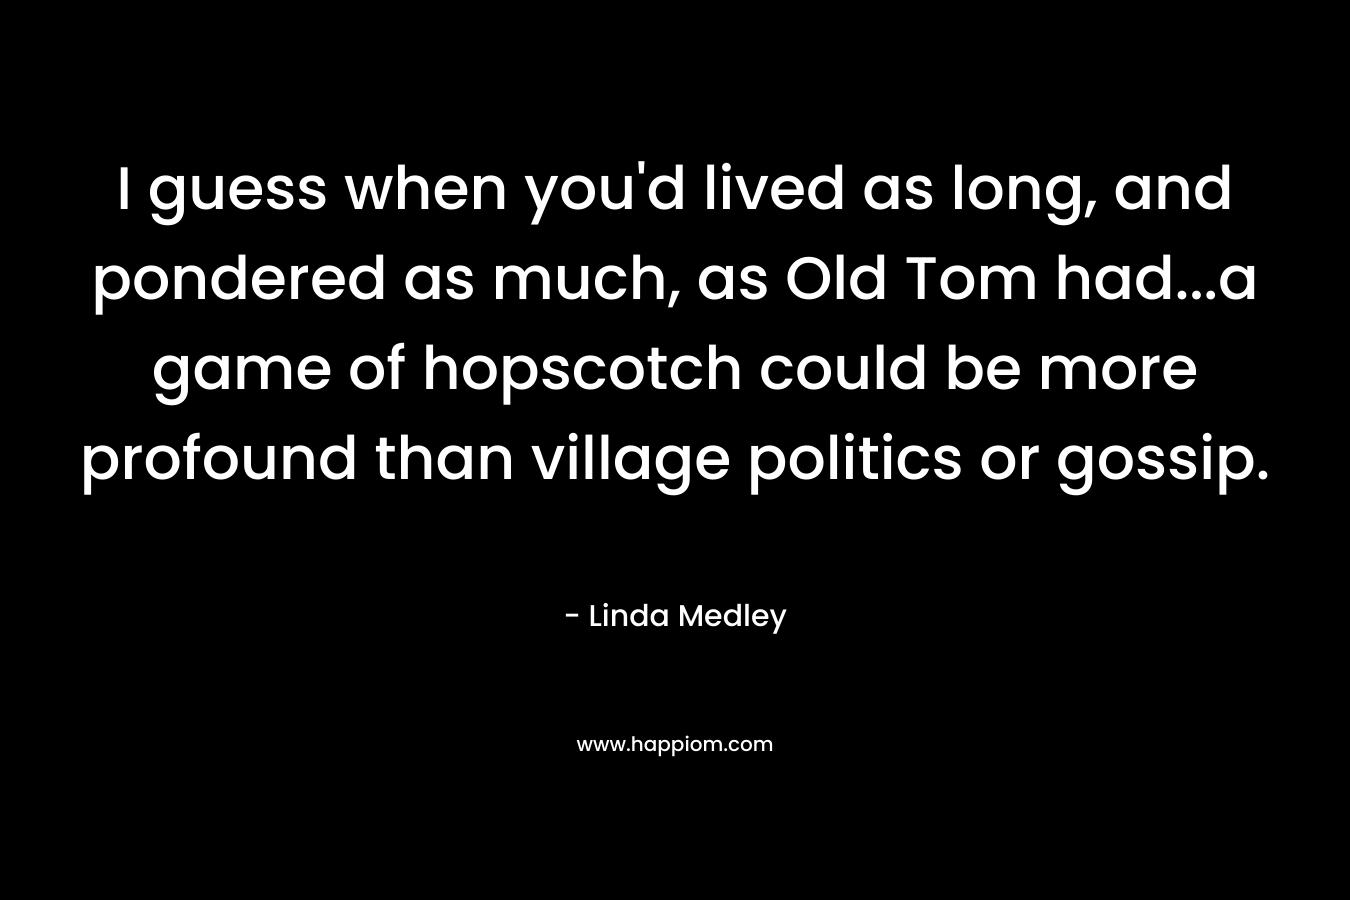 I guess when you’d lived as long, and pondered as much, as Old Tom had…a game of hopscotch could be more profound than village politics or gossip. – Linda Medley